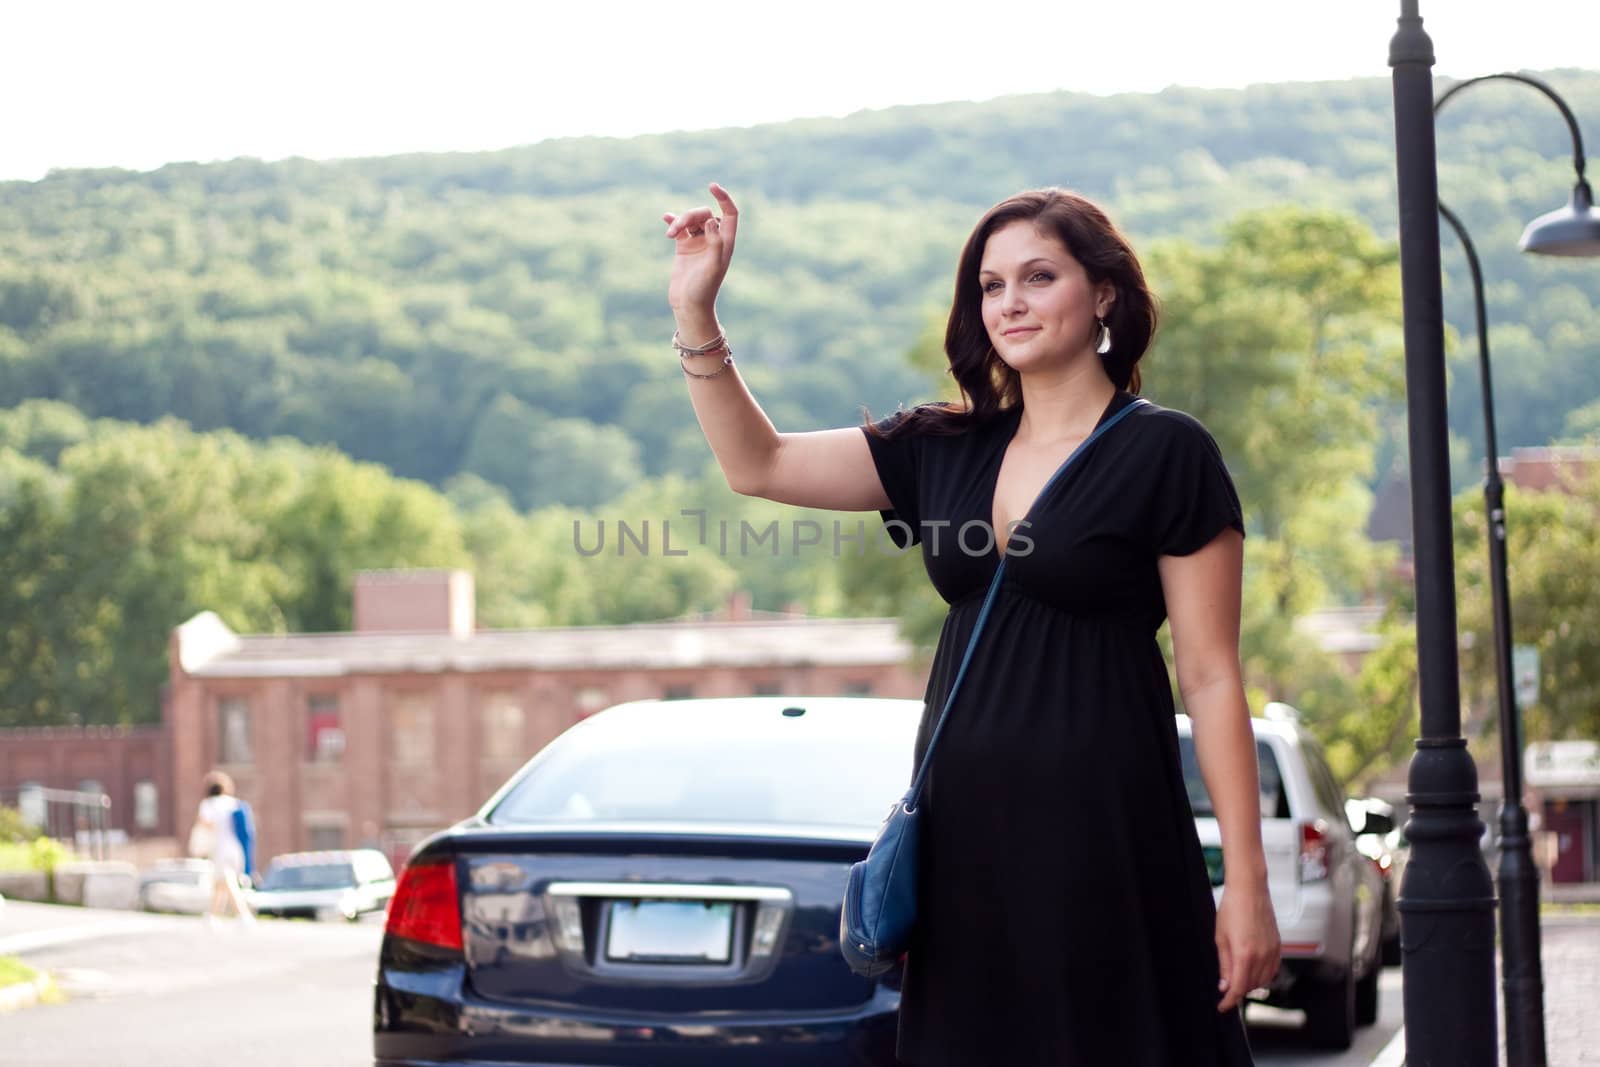 A beautiful brunette woman waving her arm tries to hail a cab at the side of the road in the city.